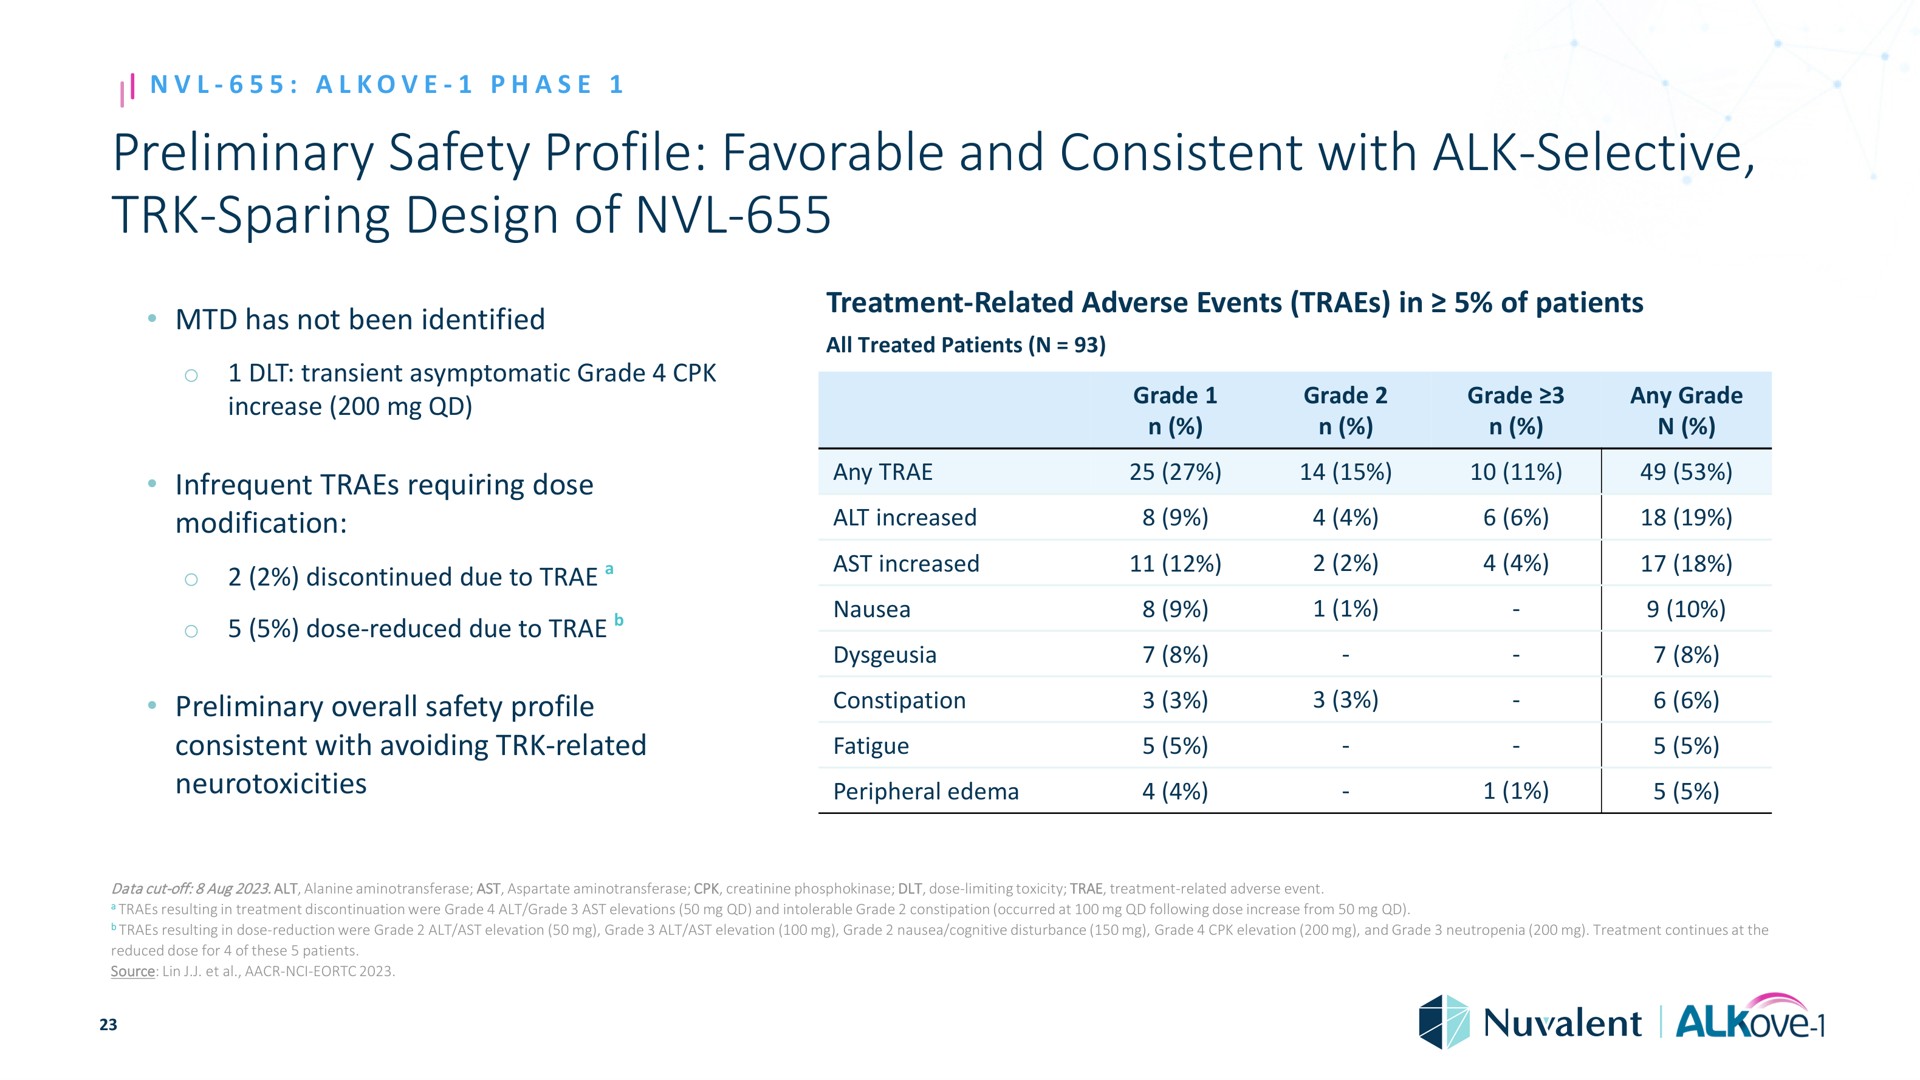 preliminary safety profile favorable and consistent with alk selective sparing design of phase treatment related adverse events in patients all treated patients has not been identified transient asymptomatic grade increase infrequent requiring dose modification discontinued due to dose reduced due to overall avoiding related any alt increased ast increased nausea constipation fatigue peripheral edema grade grade grade any grade resulting in treat resulting in dose reduced dose for source lin grade alt ast elevation grade nausea cognitive disturbance grade elevation grade treatment continues at the city treatment related adverse event at from | Nuvalent